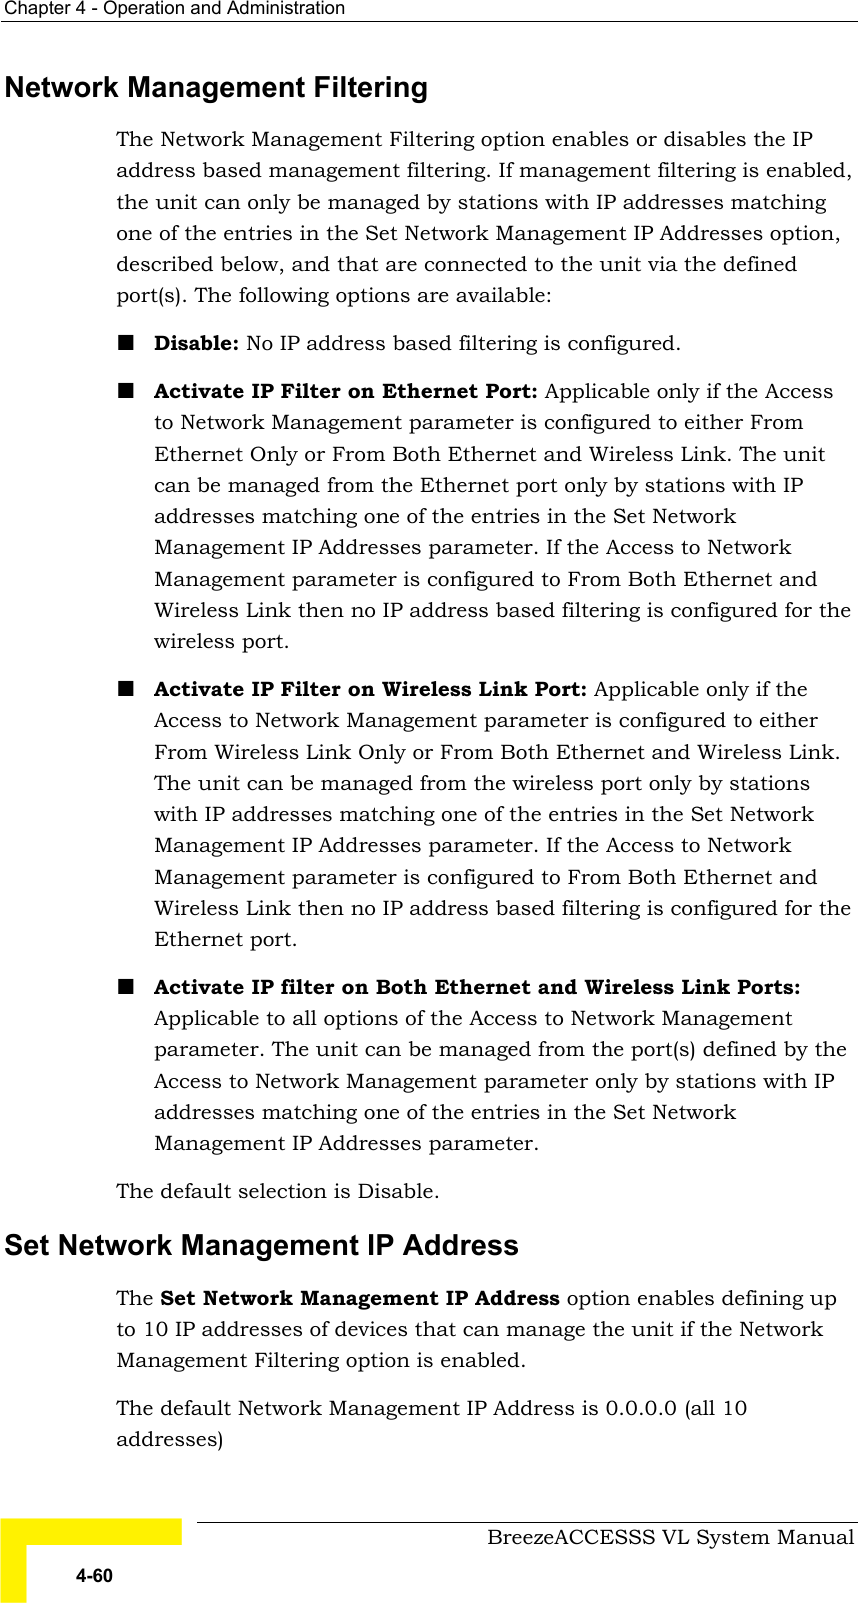 Chapter  4 - Operation and Administration     BreezeACCESSS VL System Manual 4-60 Network Management Filtering The Network Management Filtering option enables or disables the IP address based management filtering. If management filtering is enabled, the unit can only be managed by stations with IP addresses matching one of the entries in the Set Network Management IP Addresses option, described below, and that are connected to the unit via the defined port(s). The following options are available: ! Disable: No IP address based filtering is configured. ! Activate IP Filter on Ethernet Port: Applicable only if the Access to Network Management parameter is configured to either From Ethernet Only or From Both Ethernet and Wireless Link. The unit can be managed from the Ethernet port only by stations with IP addresses matching one of the entries in the Set Network Management IP Addresses parameter. If the Access to Network Management parameter is configured to From Both Ethernet and Wireless Link then no IP address based filtering is configured for the wireless port. ! Activate IP Filter on Wireless Link Port: Applicable only if the Access to Network Management parameter is configured to either From Wireless Link Only or From Both Ethernet and Wireless Link. The unit can be managed from the wireless port only by stations with IP addresses matching one of the entries in the Set Network Management IP Addresses parameter. If the Access to Network Management parameter is configured to From Both Ethernet and Wireless Link then no IP address based filtering is configured for the Ethernet port. ! Activate IP filter on Both Ethernet and Wireless Link Ports: Applicable to all options of the Access to Network Management parameter. The unit can be managed from the port(s) defined by the Access to Network Management parameter only by stations with IP addresses matching one of the entries in the Set Network Management IP Addresses parameter. The default selection is Disable. Set Network Management IP Address The Set Network Management IP Address option enables defining up to 10 IP addresses of devices that can manage the unit if the Network Management Filtering option is enabled. The default Network Management IP Address is 0.0.0.0 (all 10 addresses) 